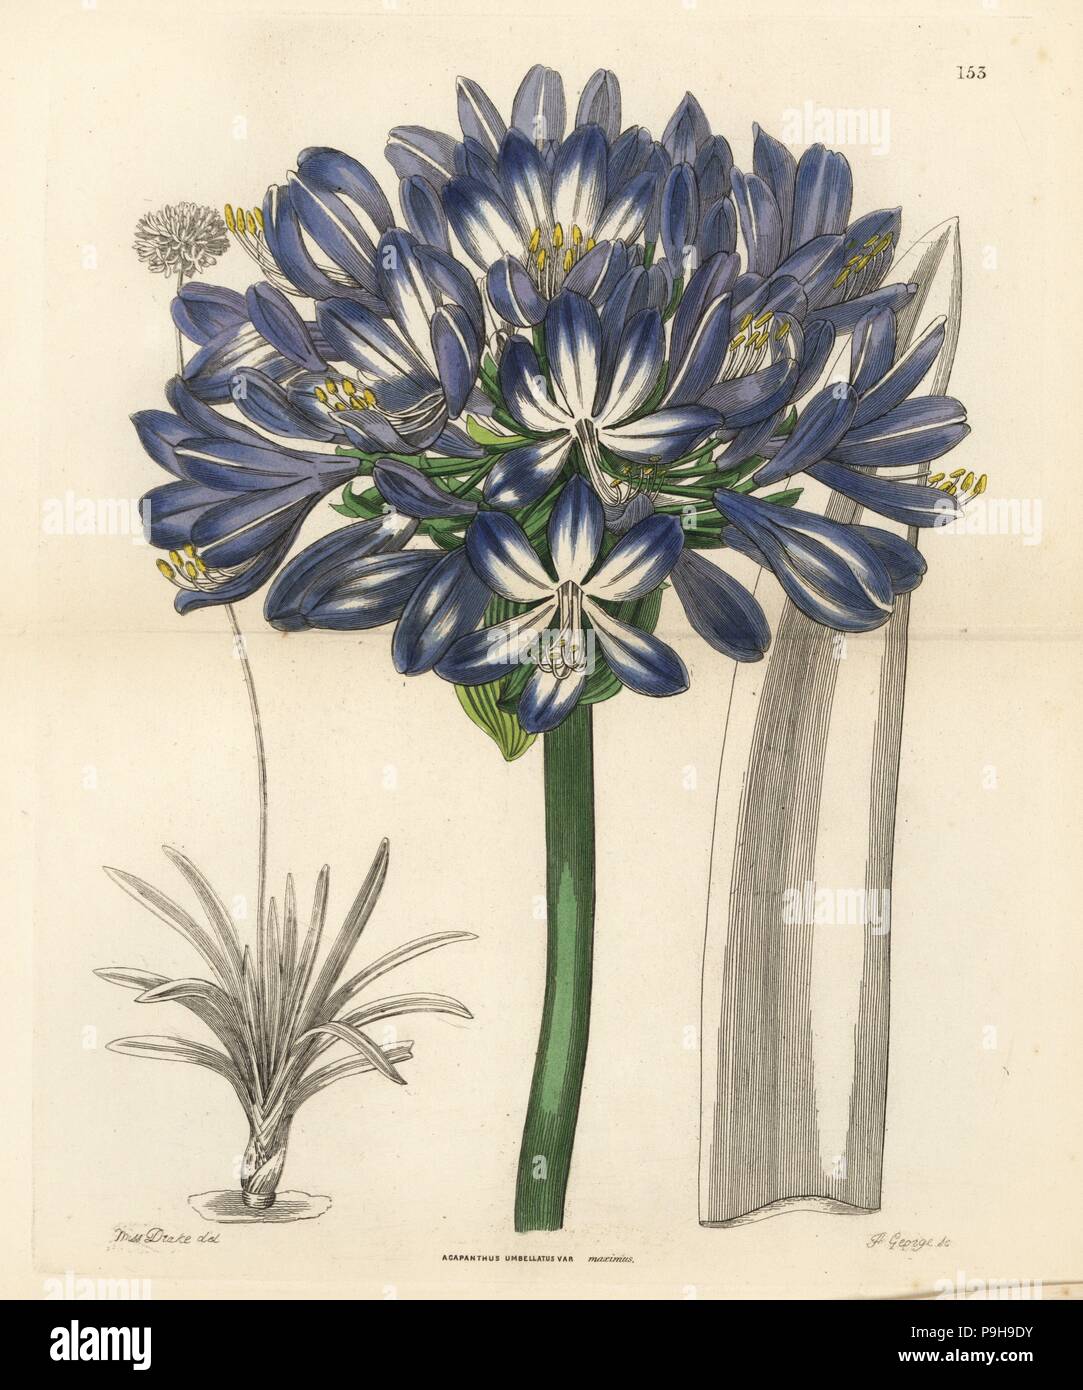 African blue lily, Agapanthus praecox subsp. orientalis (Large-flowered African blue lily, Agapanthus umbellatus var. maximus). Handcoloured copperplate engraving by J. George after Miss Sarah Drake from John Lindley and Robert Sweet's Ornamental Flower Garden and Shrubbery, G. Willis, London, 1854. Stock Photo